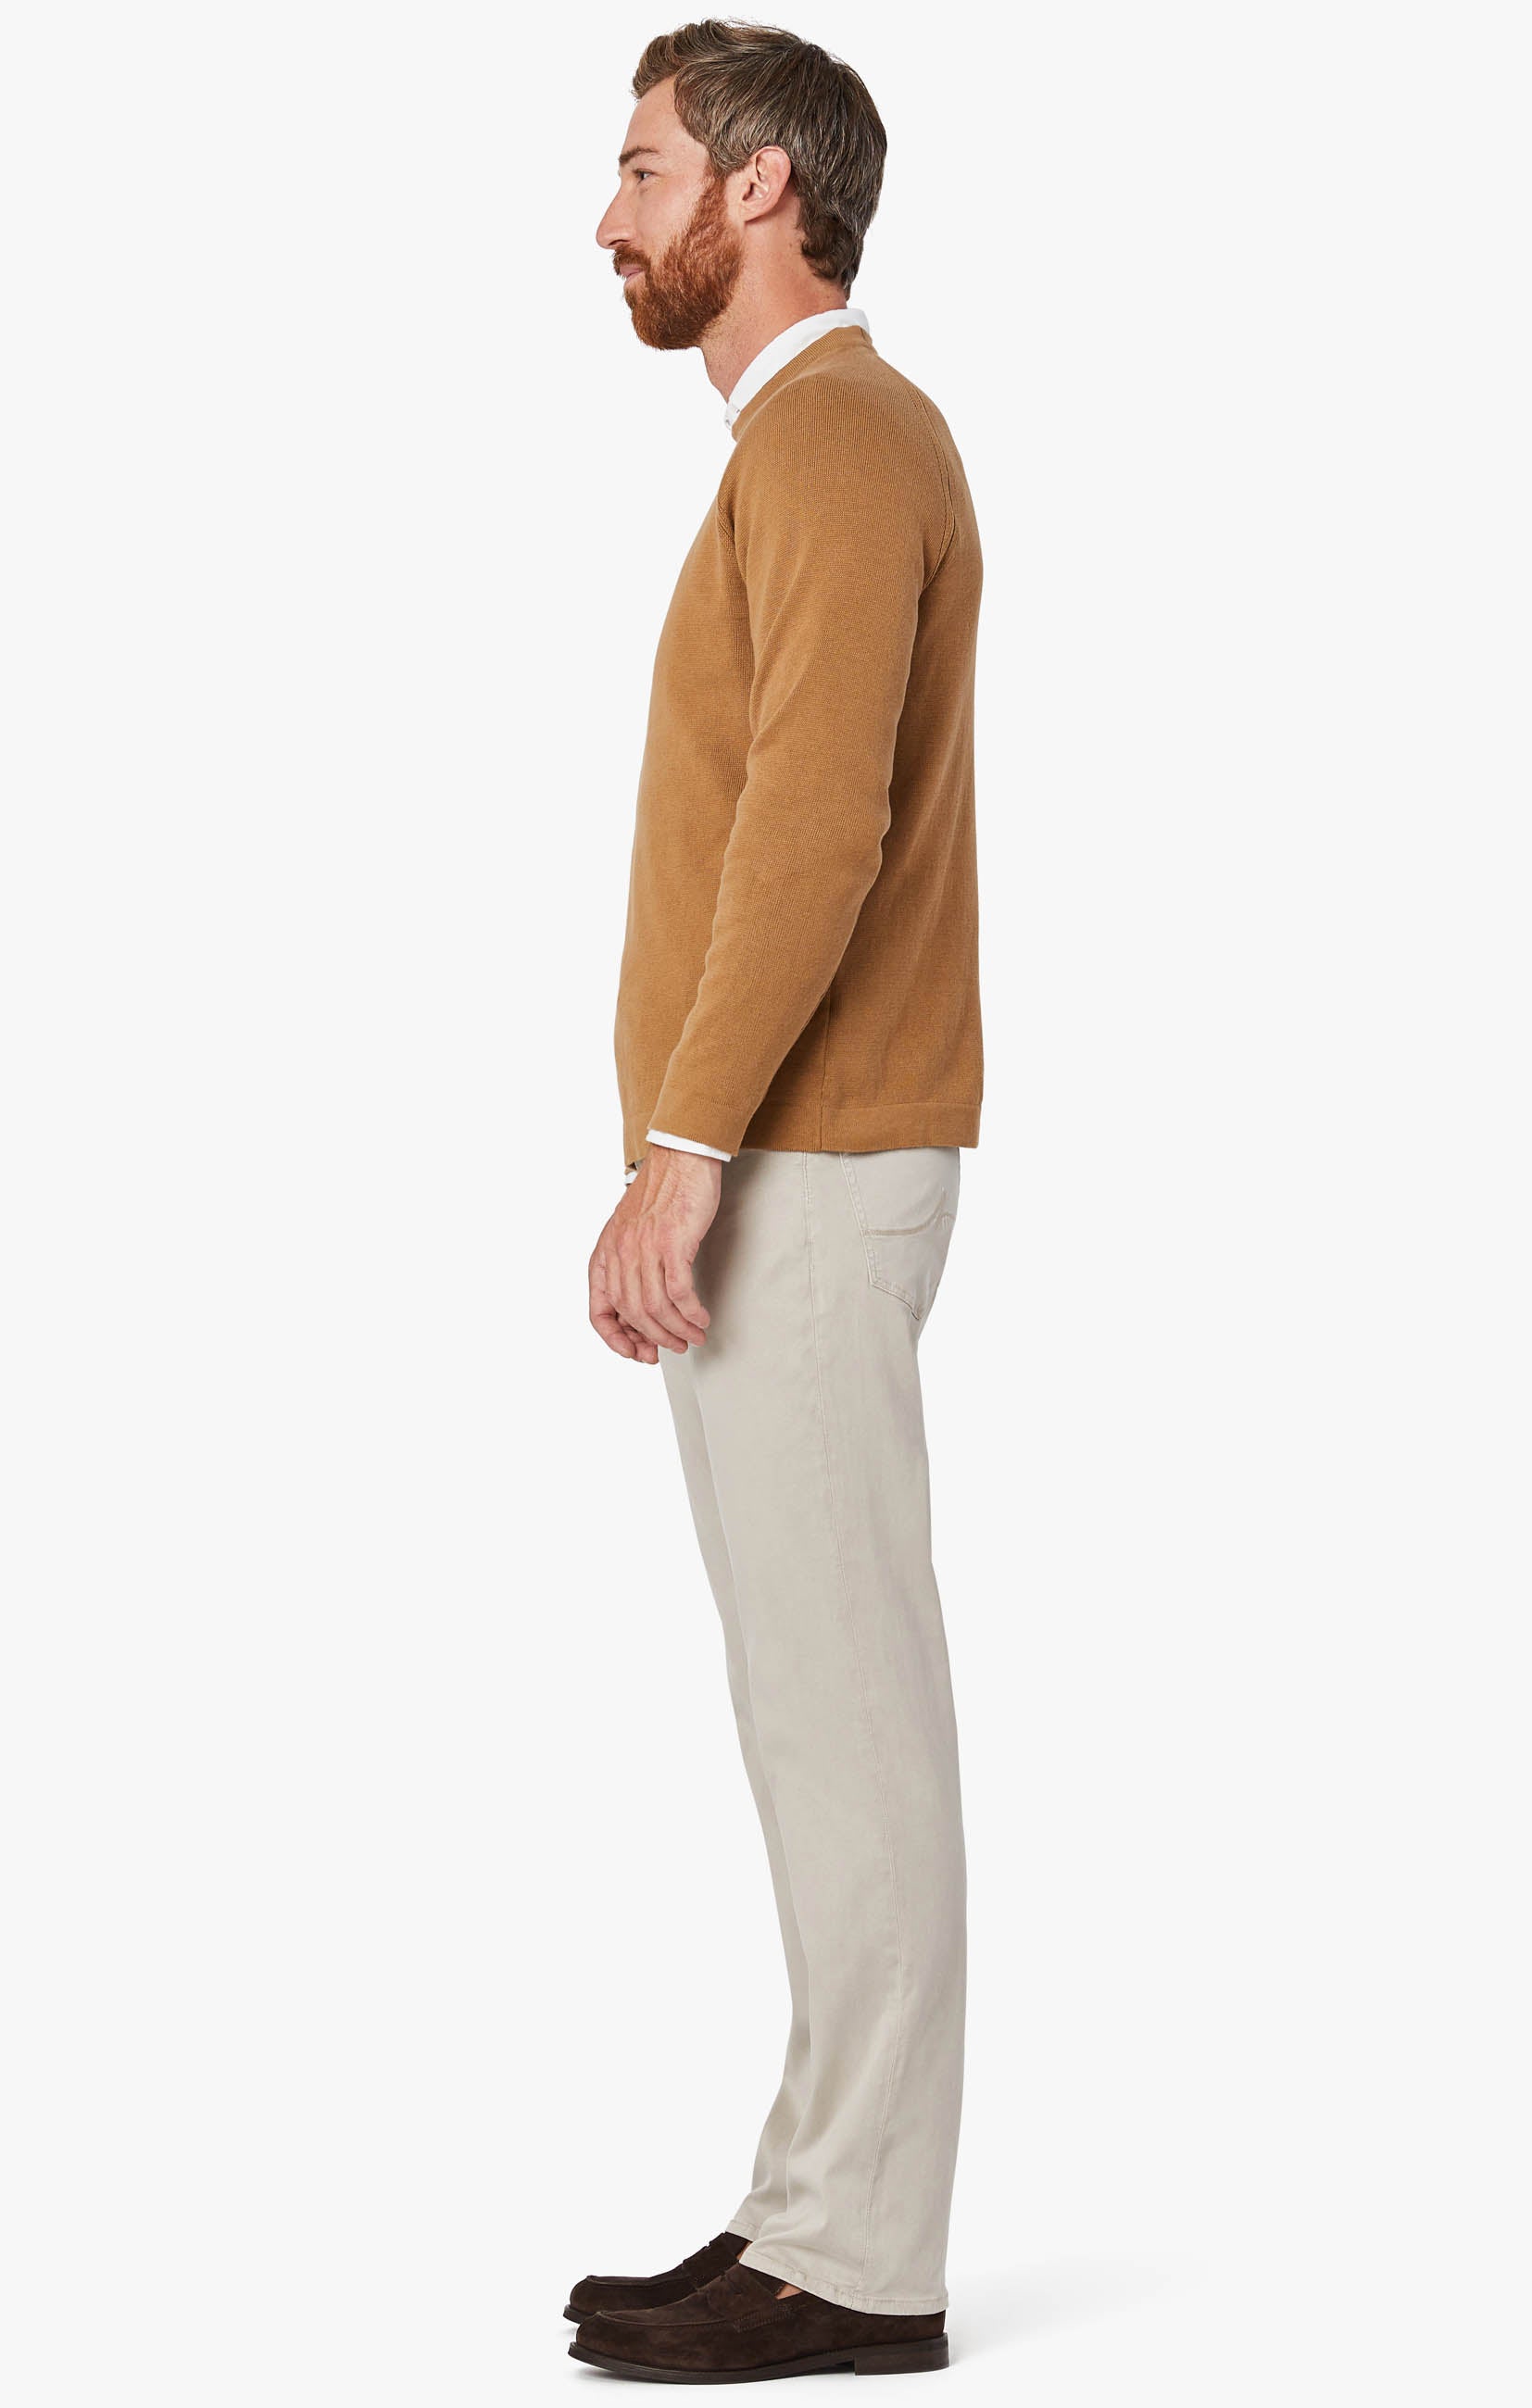 Charisma Relaxed Straight Leg Pants in Dawn Twill Image 3